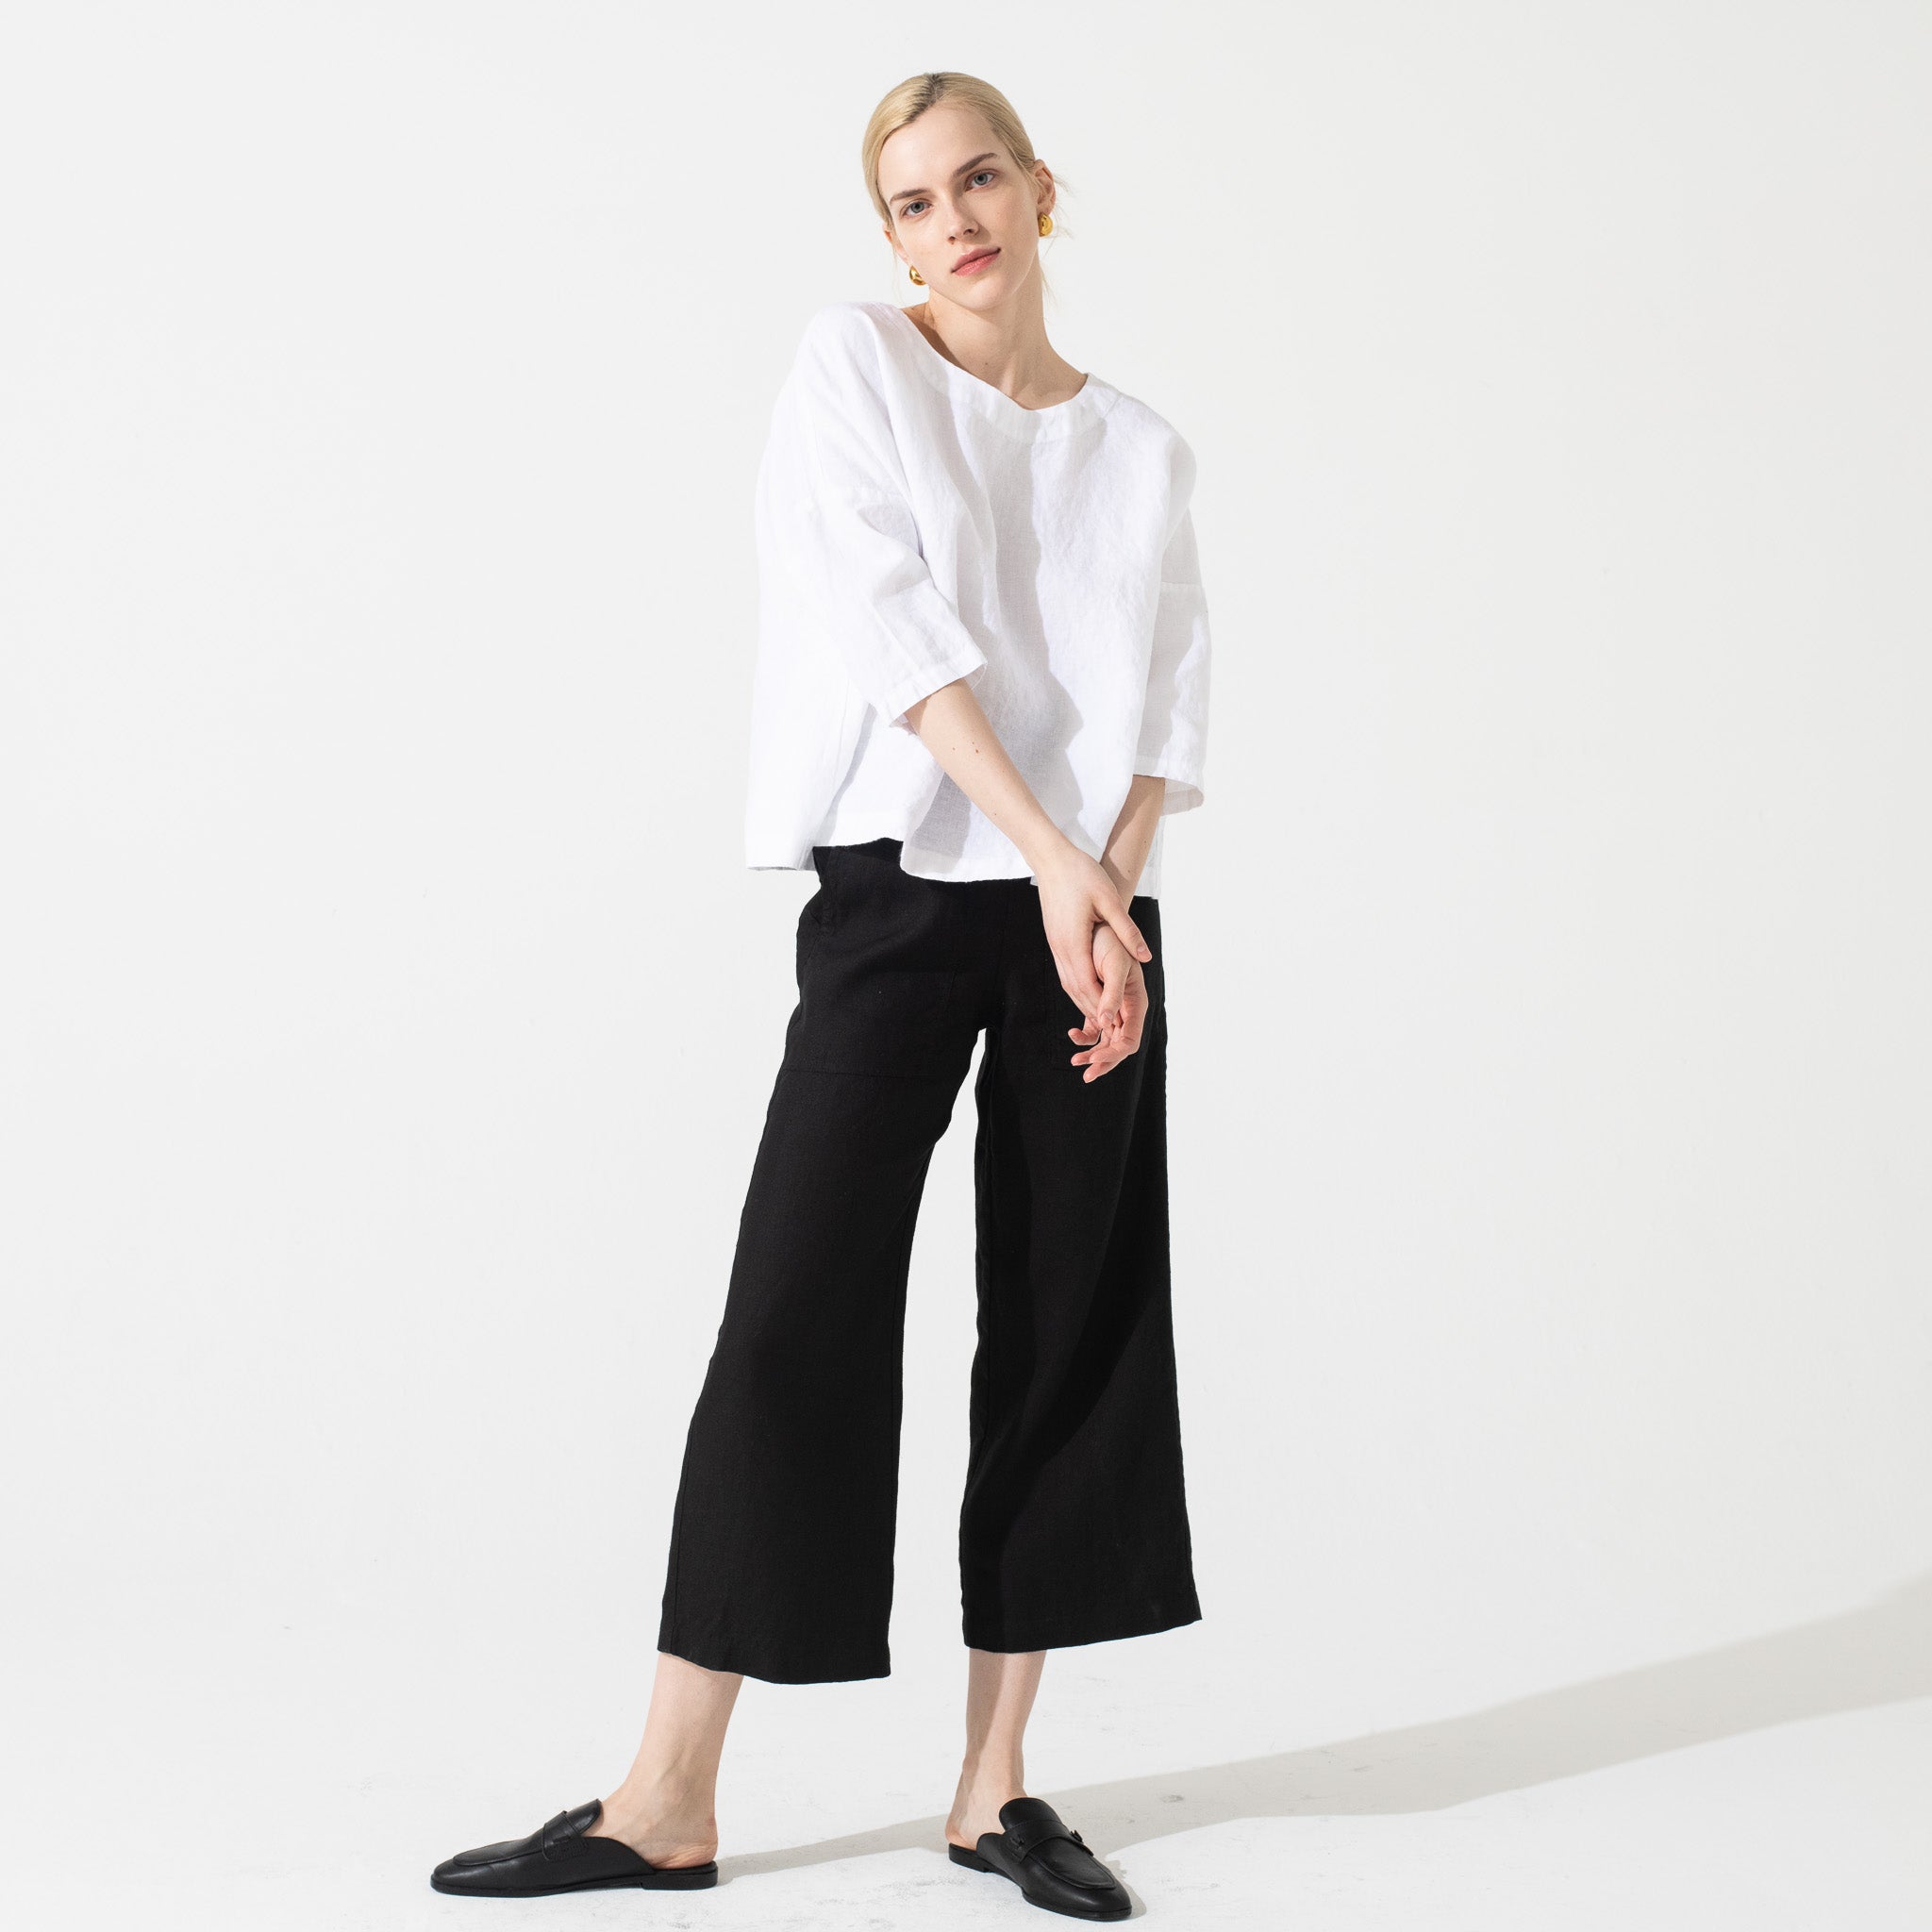 PUGLIA fitted linen pants in Black